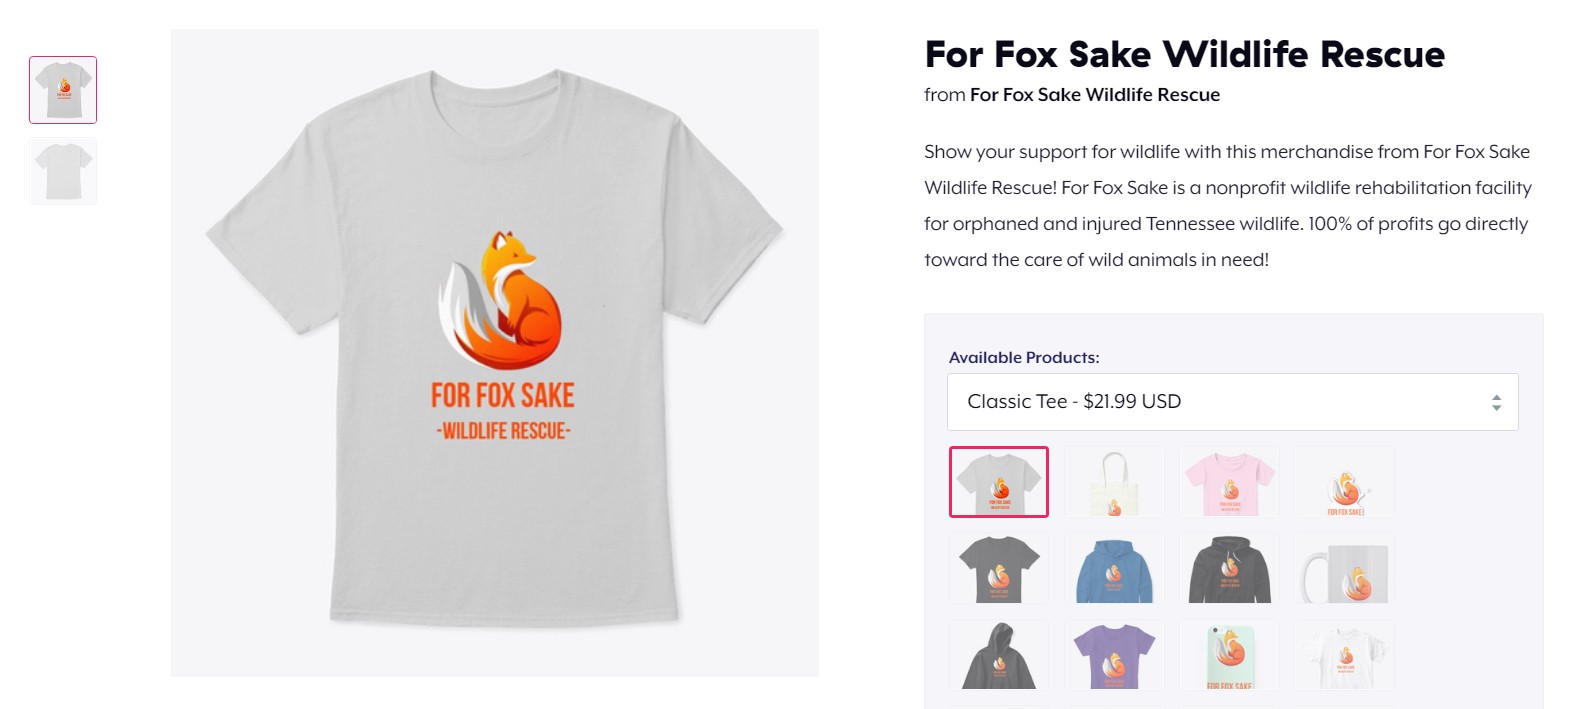 Teespring is one of our favorite crowdfunding websites.